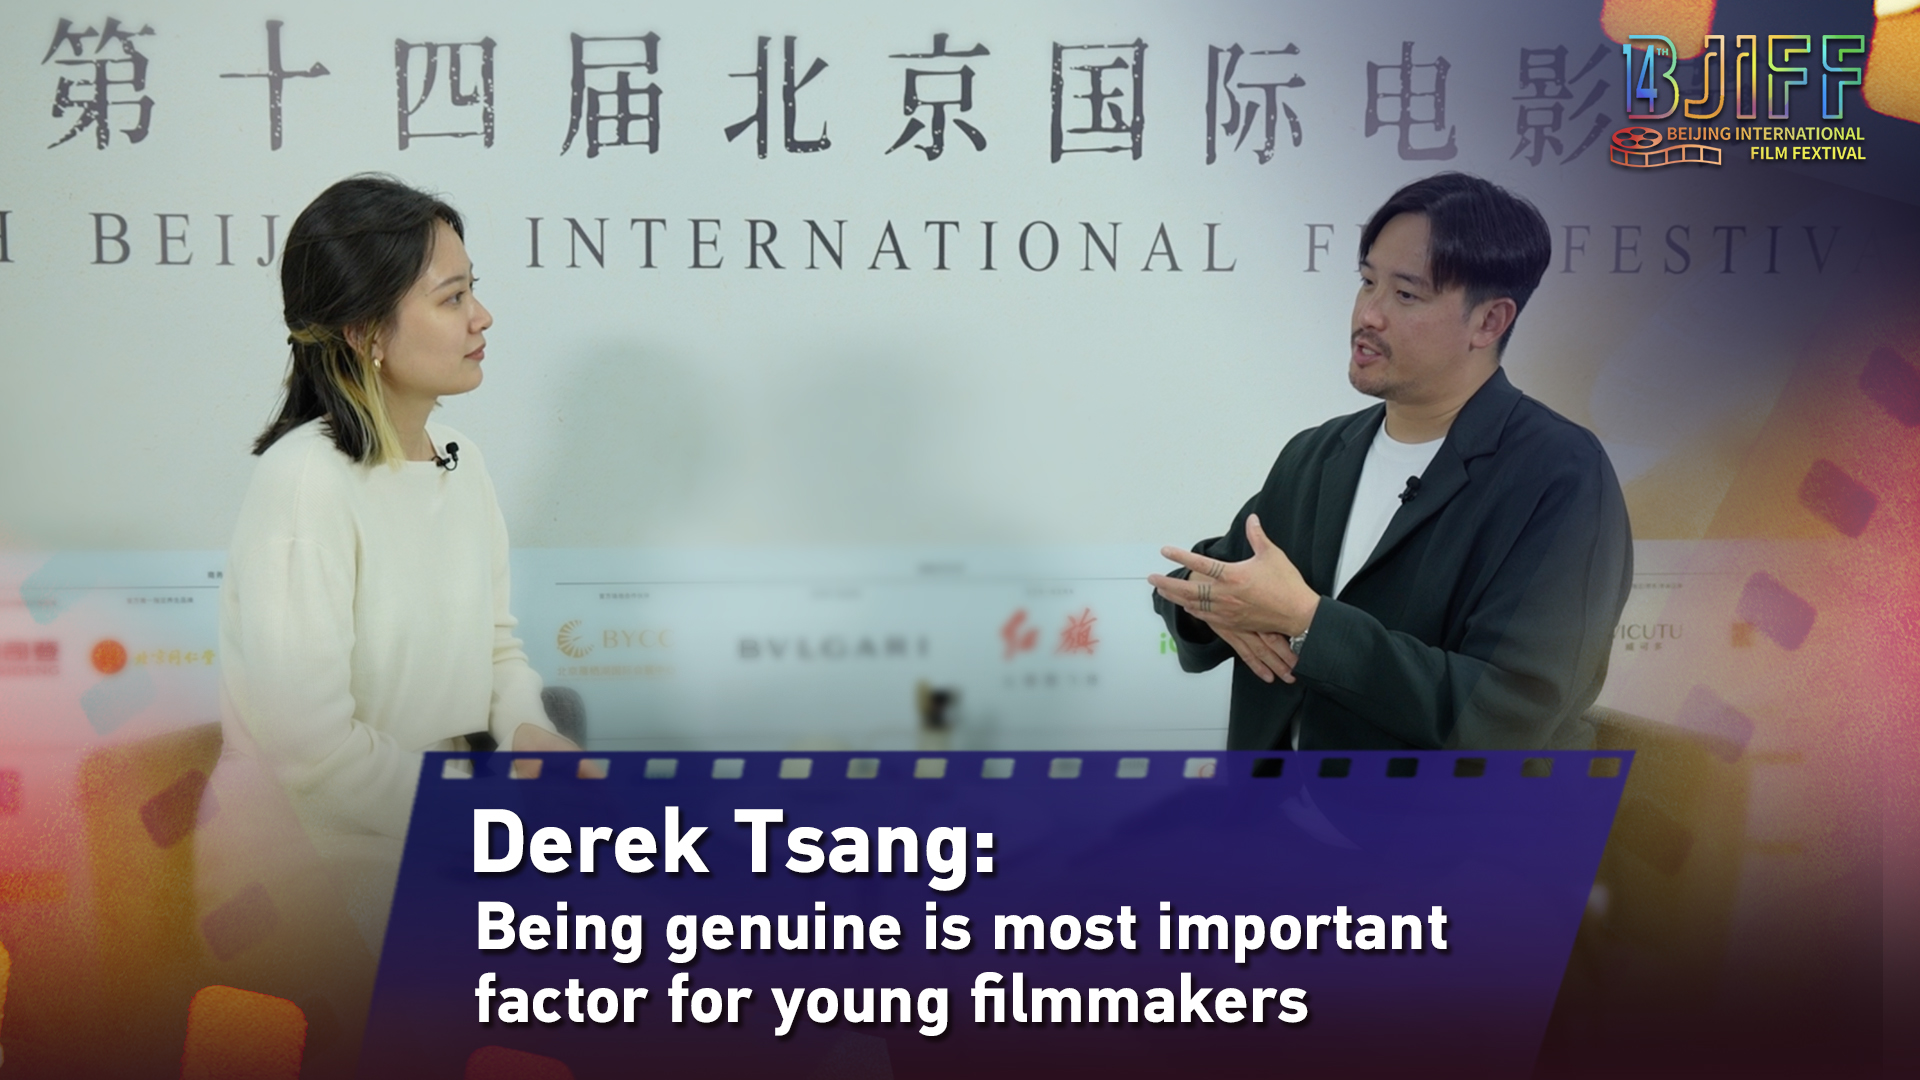 Derek Tsang: Genuineness is most important factor for young filmmakers